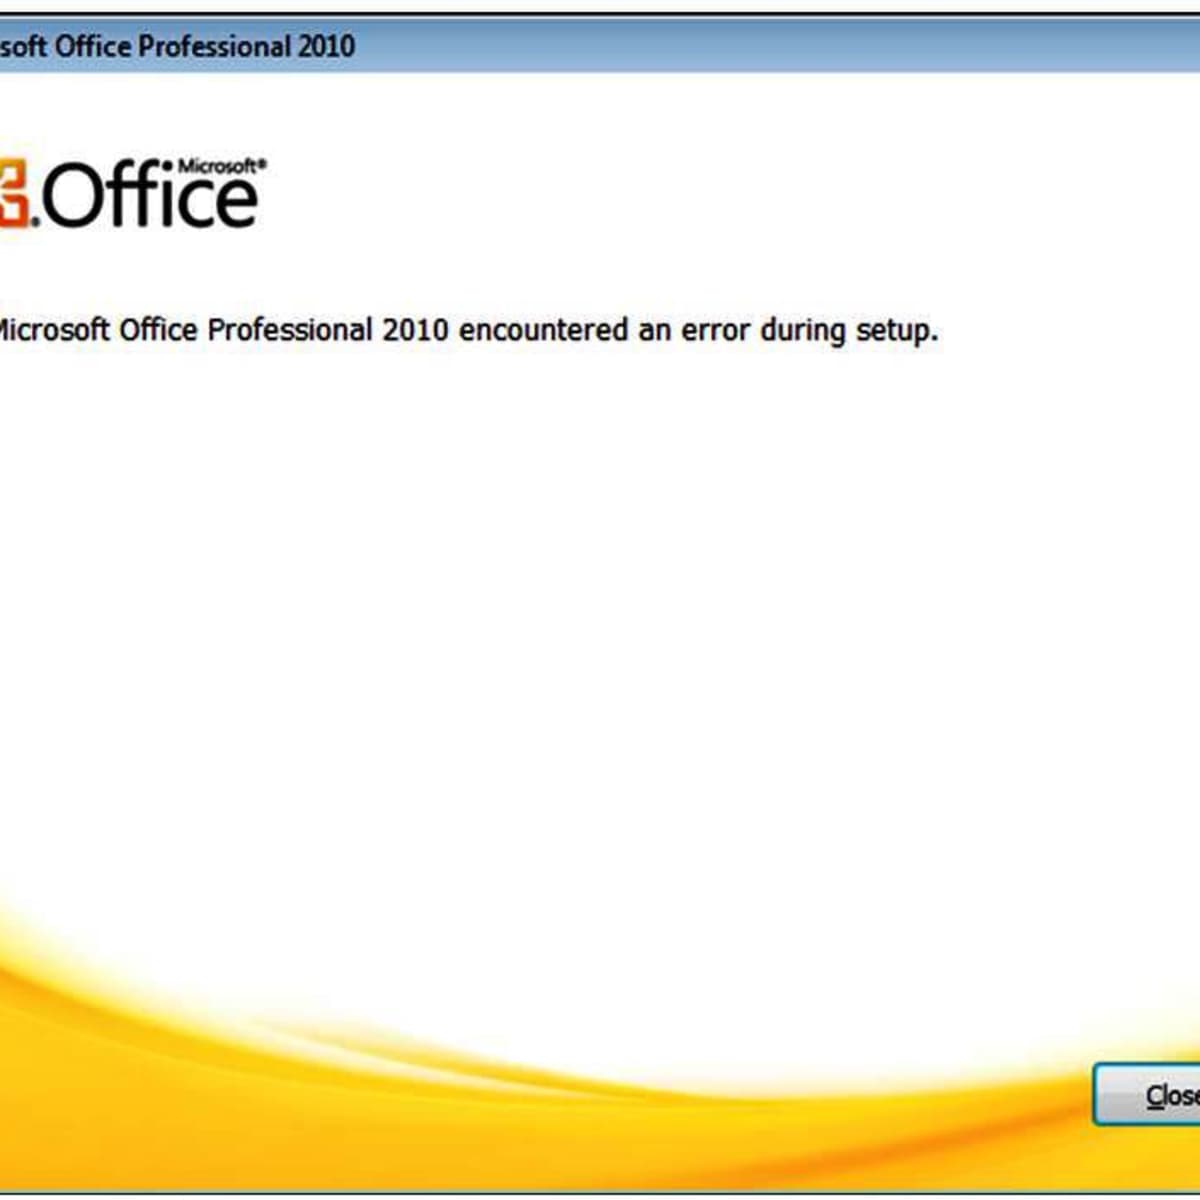 ms office professional plus 2010 encountered an error during setup error 2902